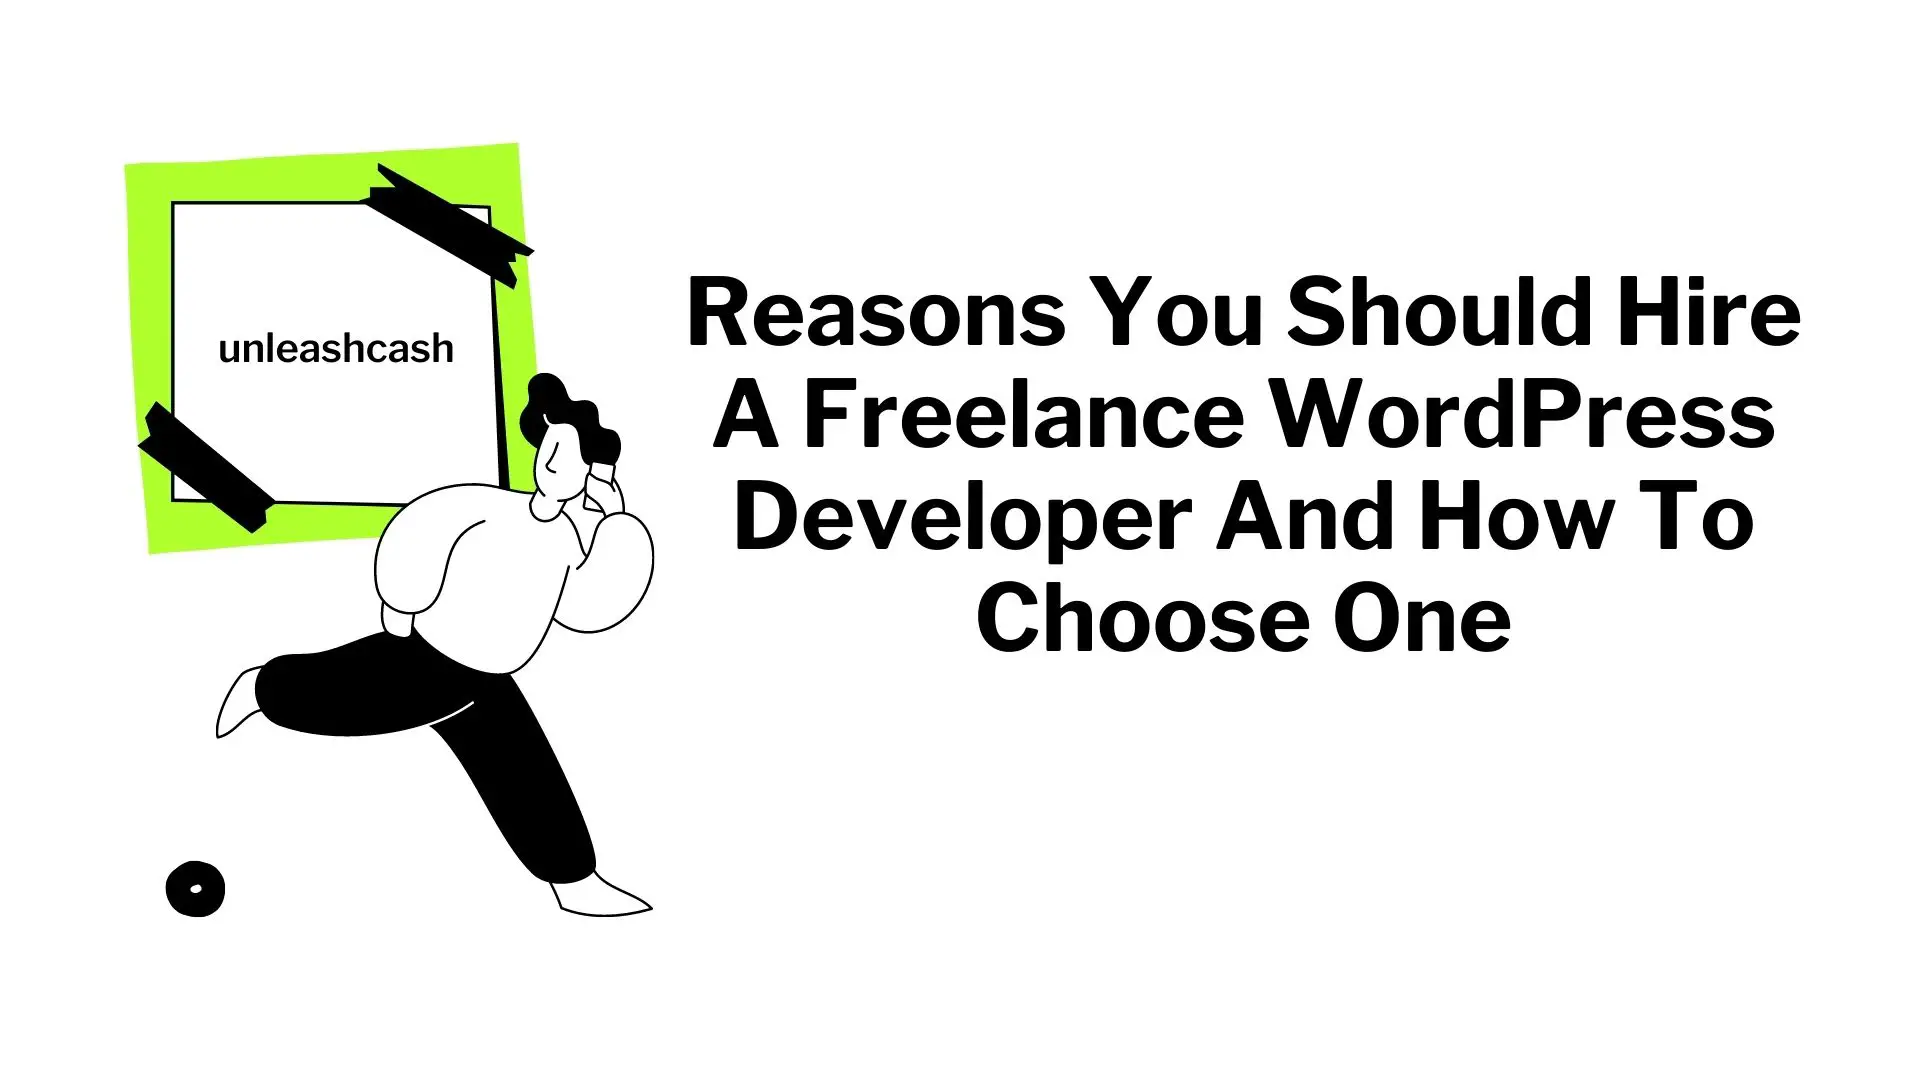 Reasons You Should Hire A Freelance WordPress Developer And How To Choose One